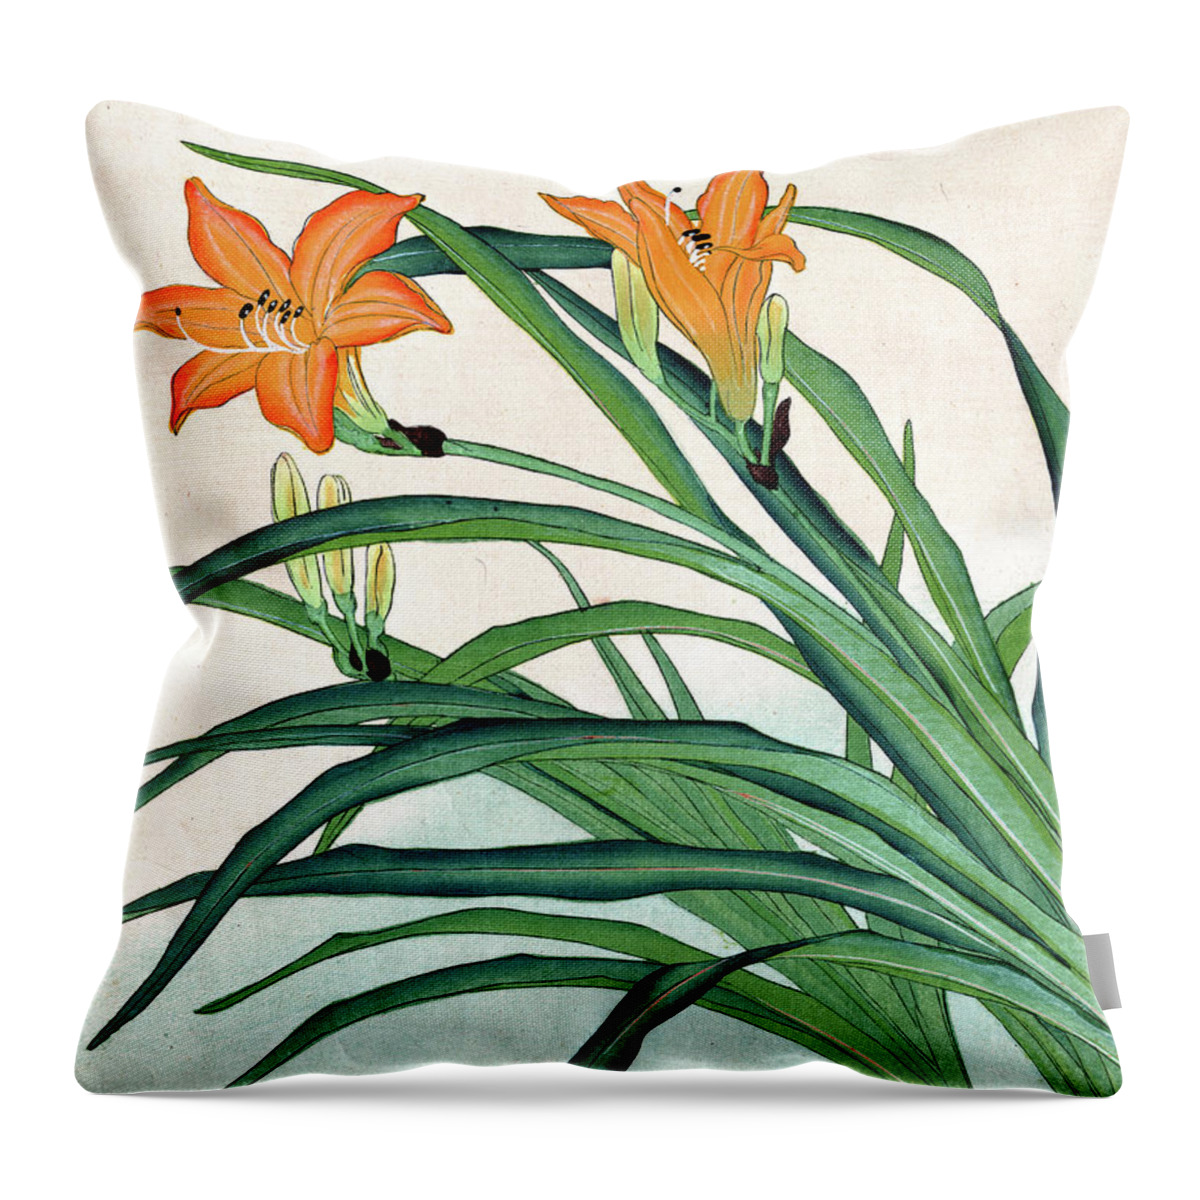  Throw Pillow featuring the painting Roys Collection 1 by John Gholson